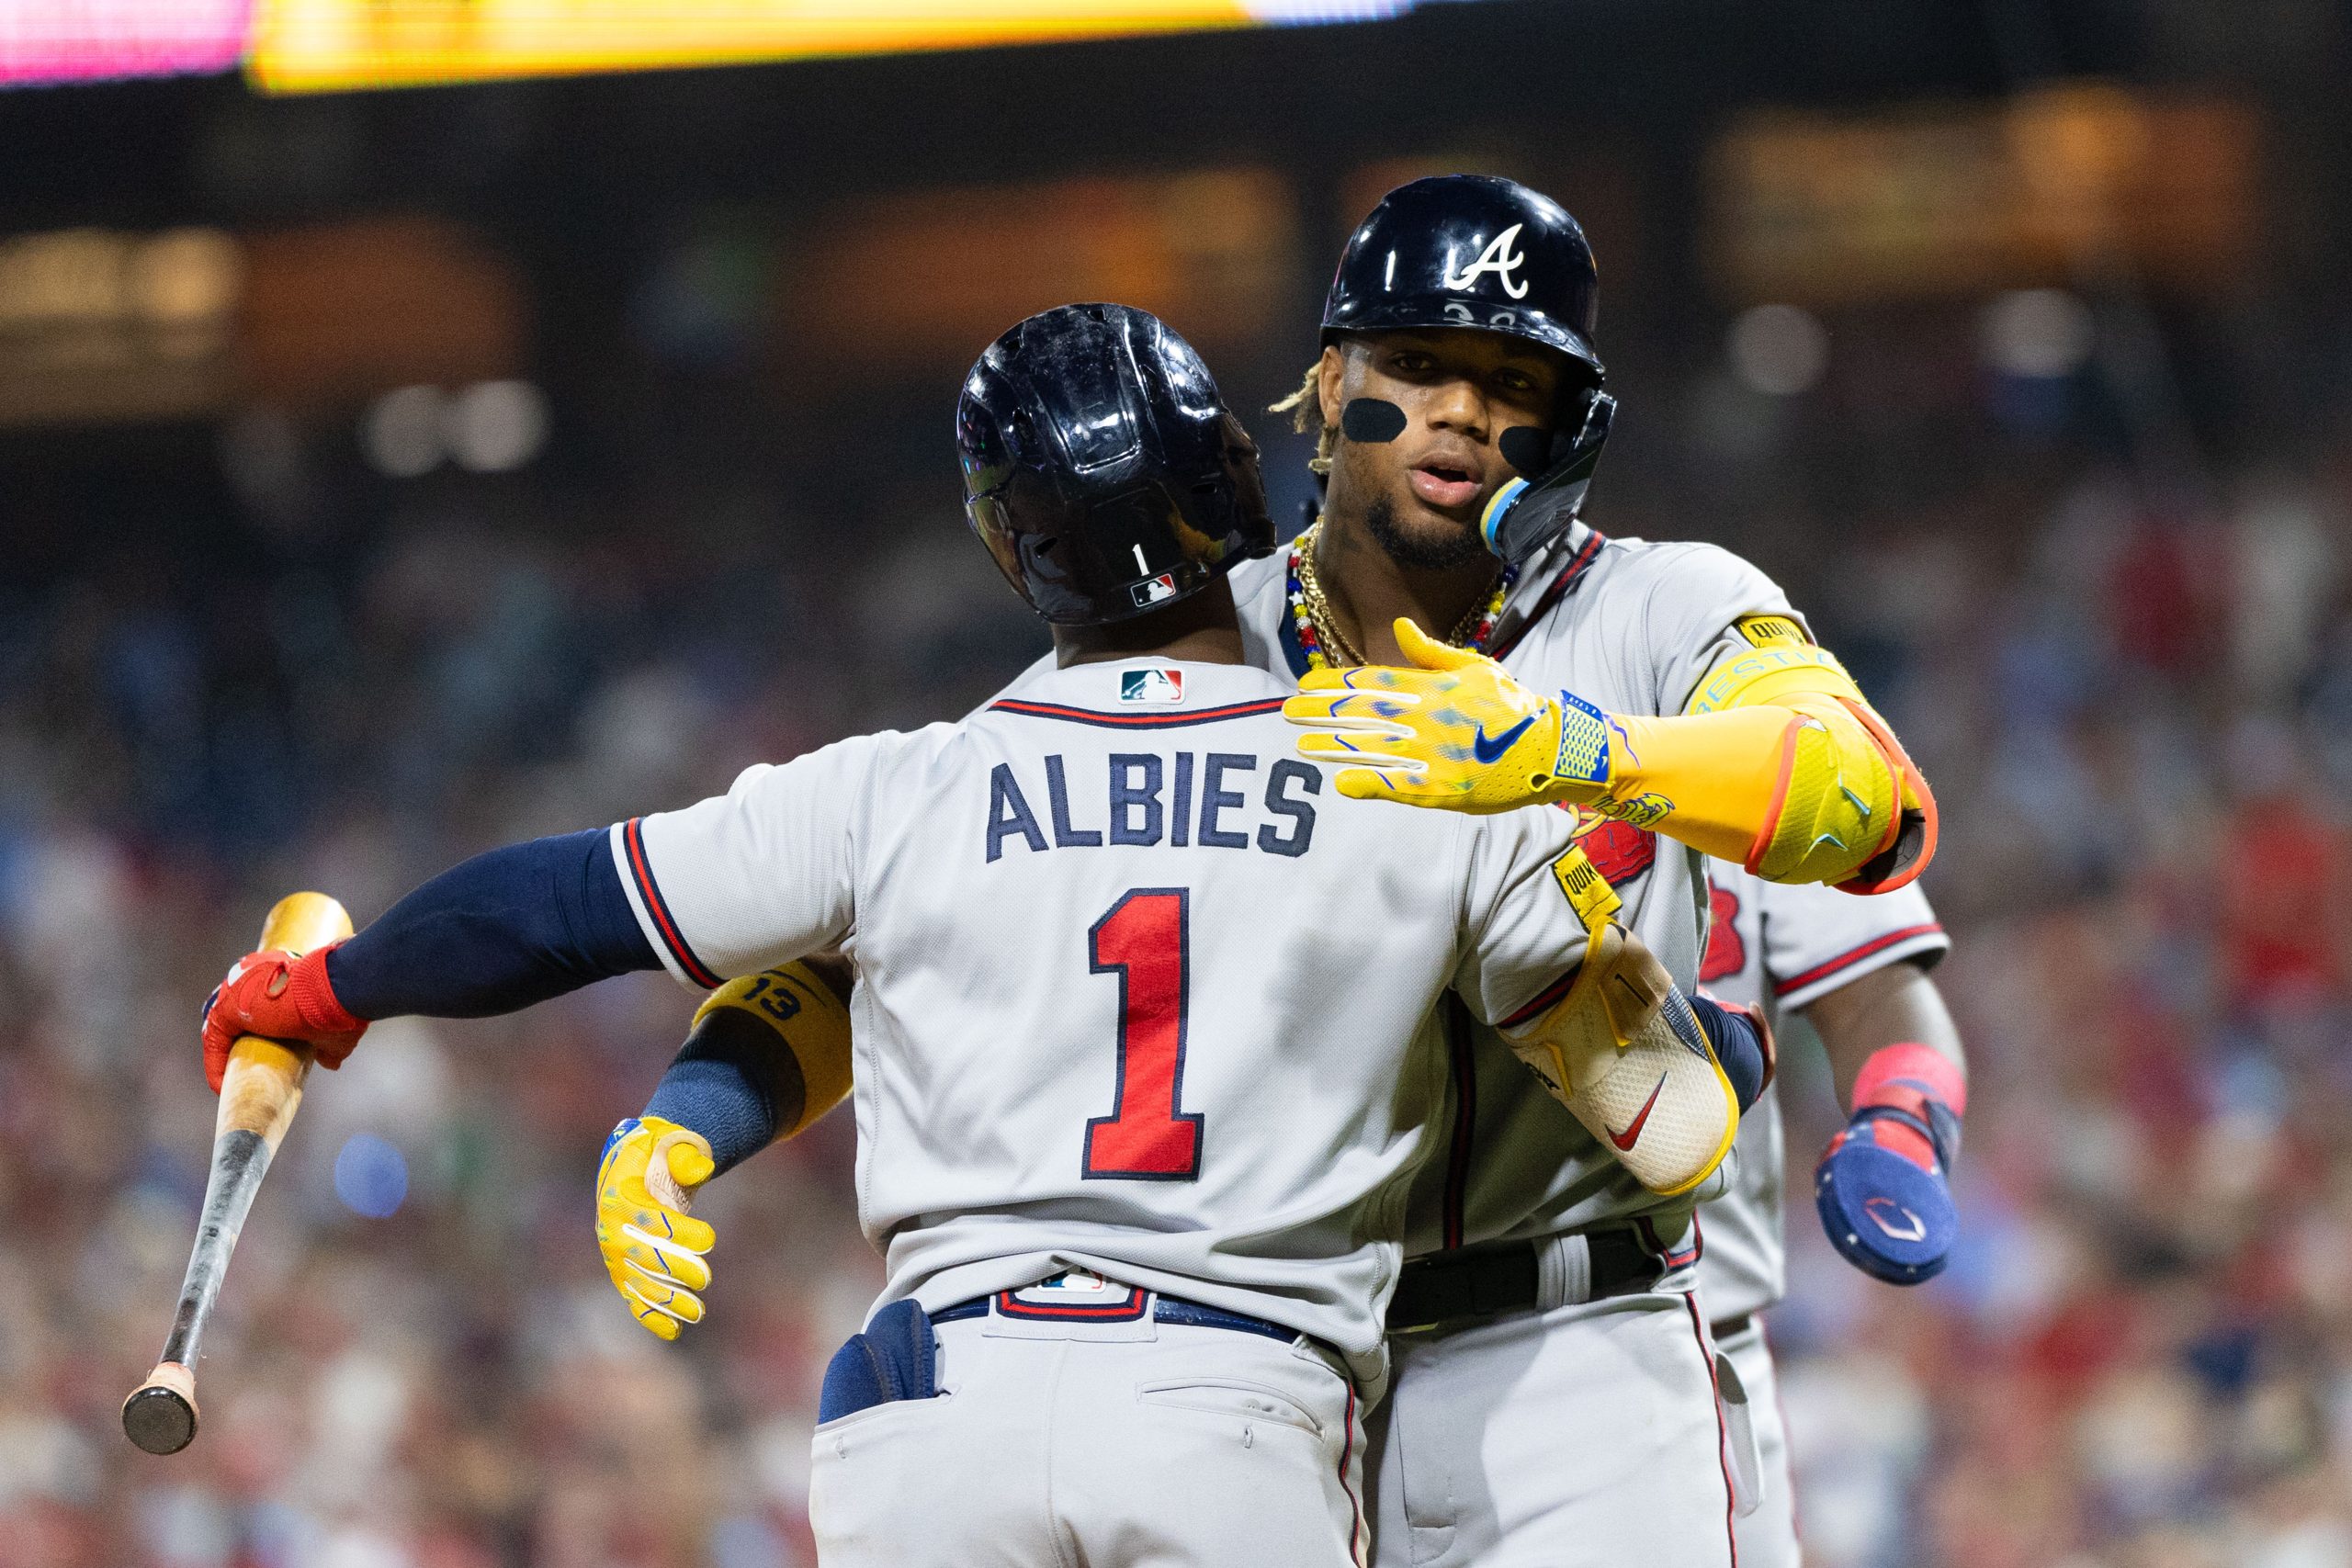 What Atlanta Braves fans think of the team as we start 2019